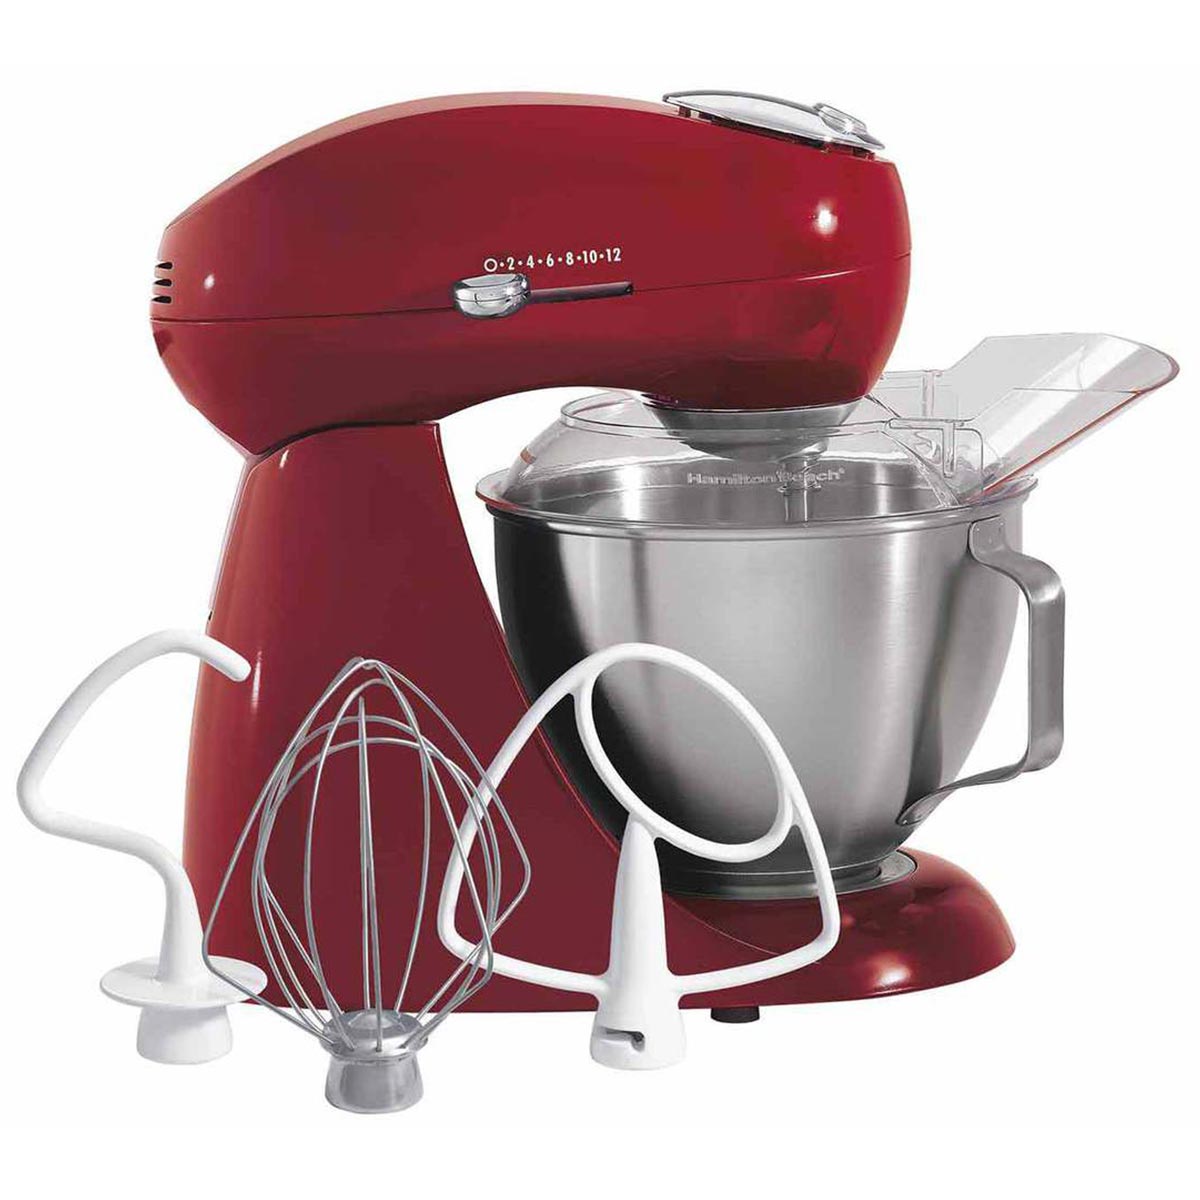 Eclectrics® Carmine Red All-Metal Stand Mixer (63232)